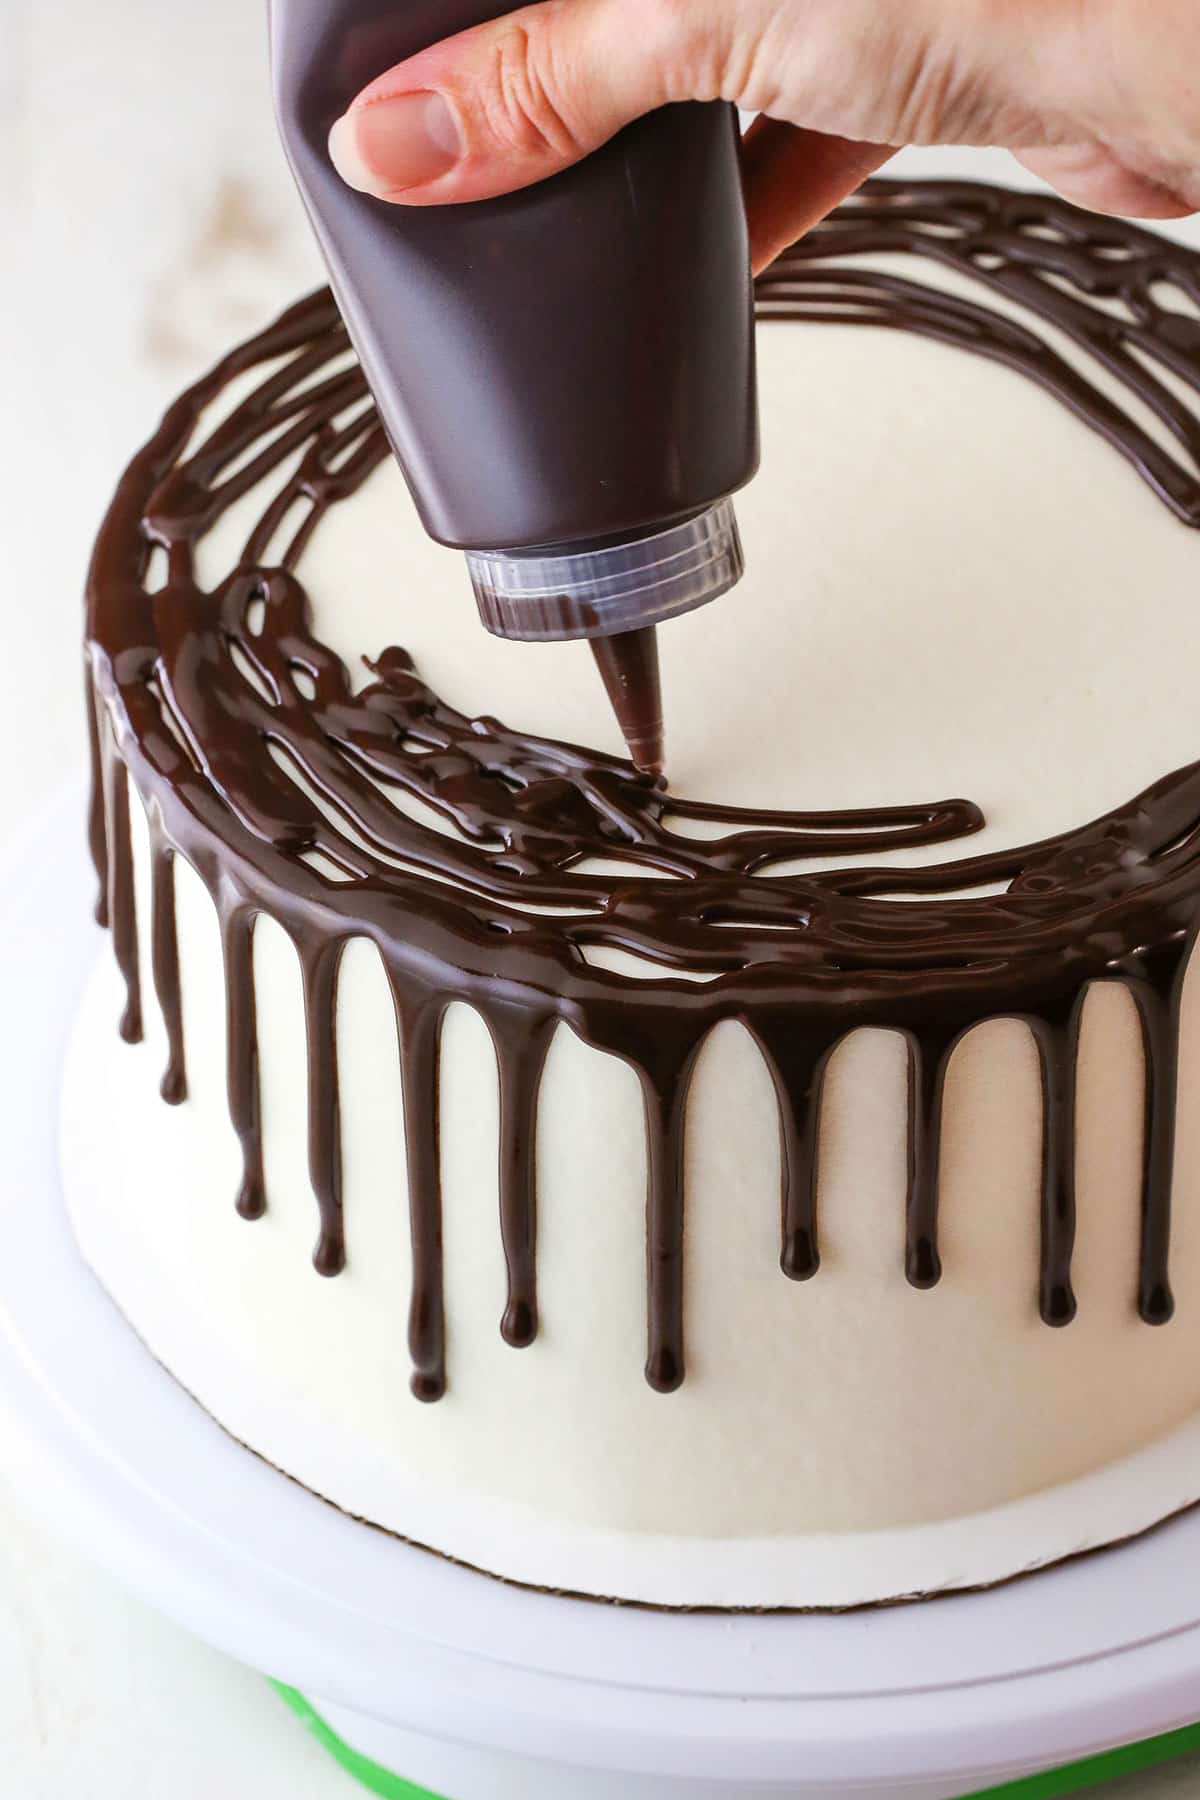 How to Make a Chocolate Drip Cake tutorial showing using a squeeze bottle to fill and cover the top of the cake with chocolate ganache